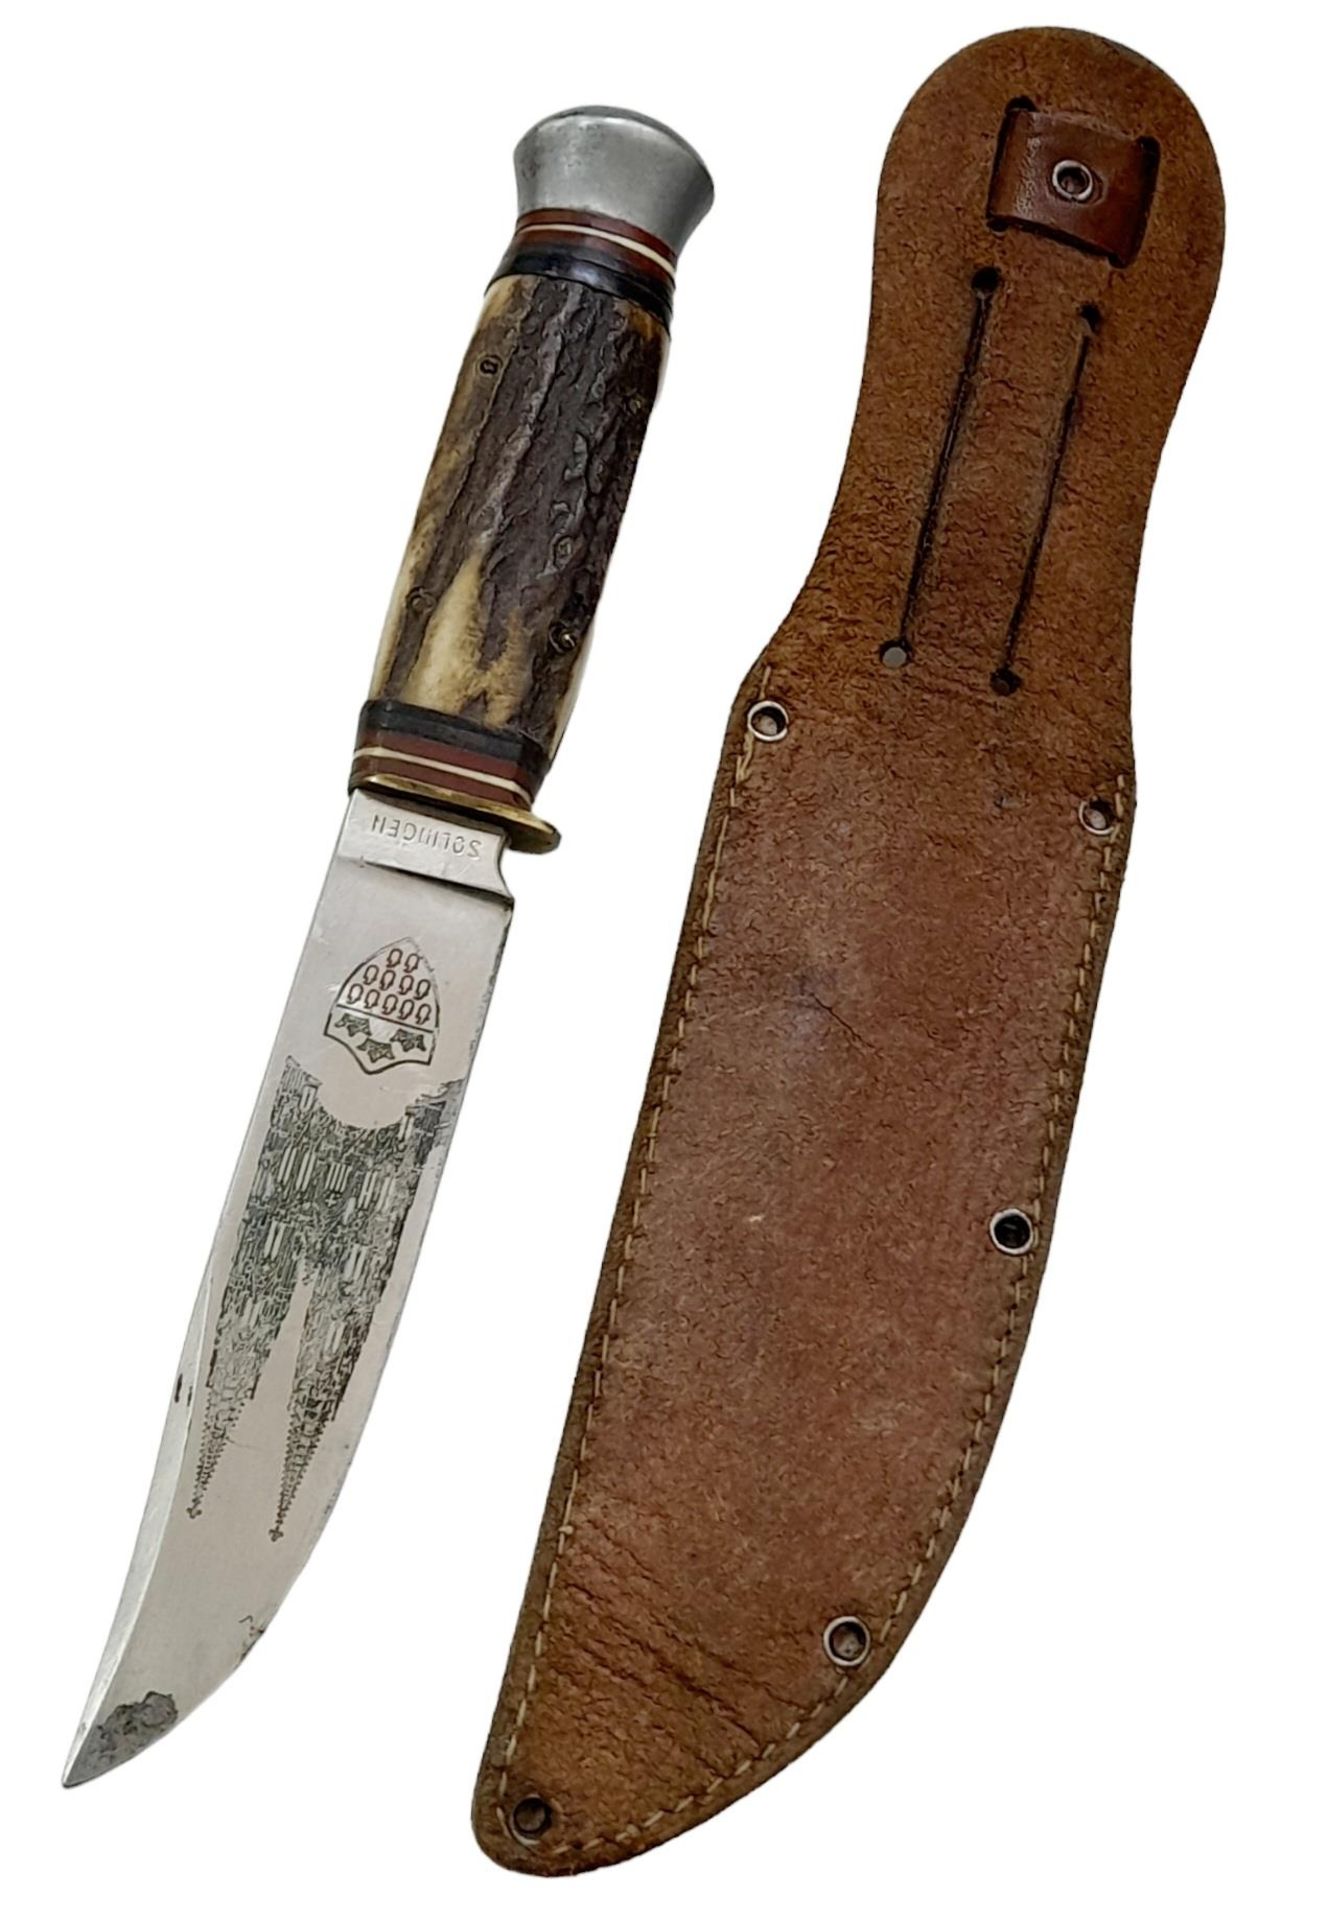 3rd Reich Hitler Youth Sheath Knife with acid etched blade dedicated to the 12th SS (Hitler Youth) - Image 4 of 5